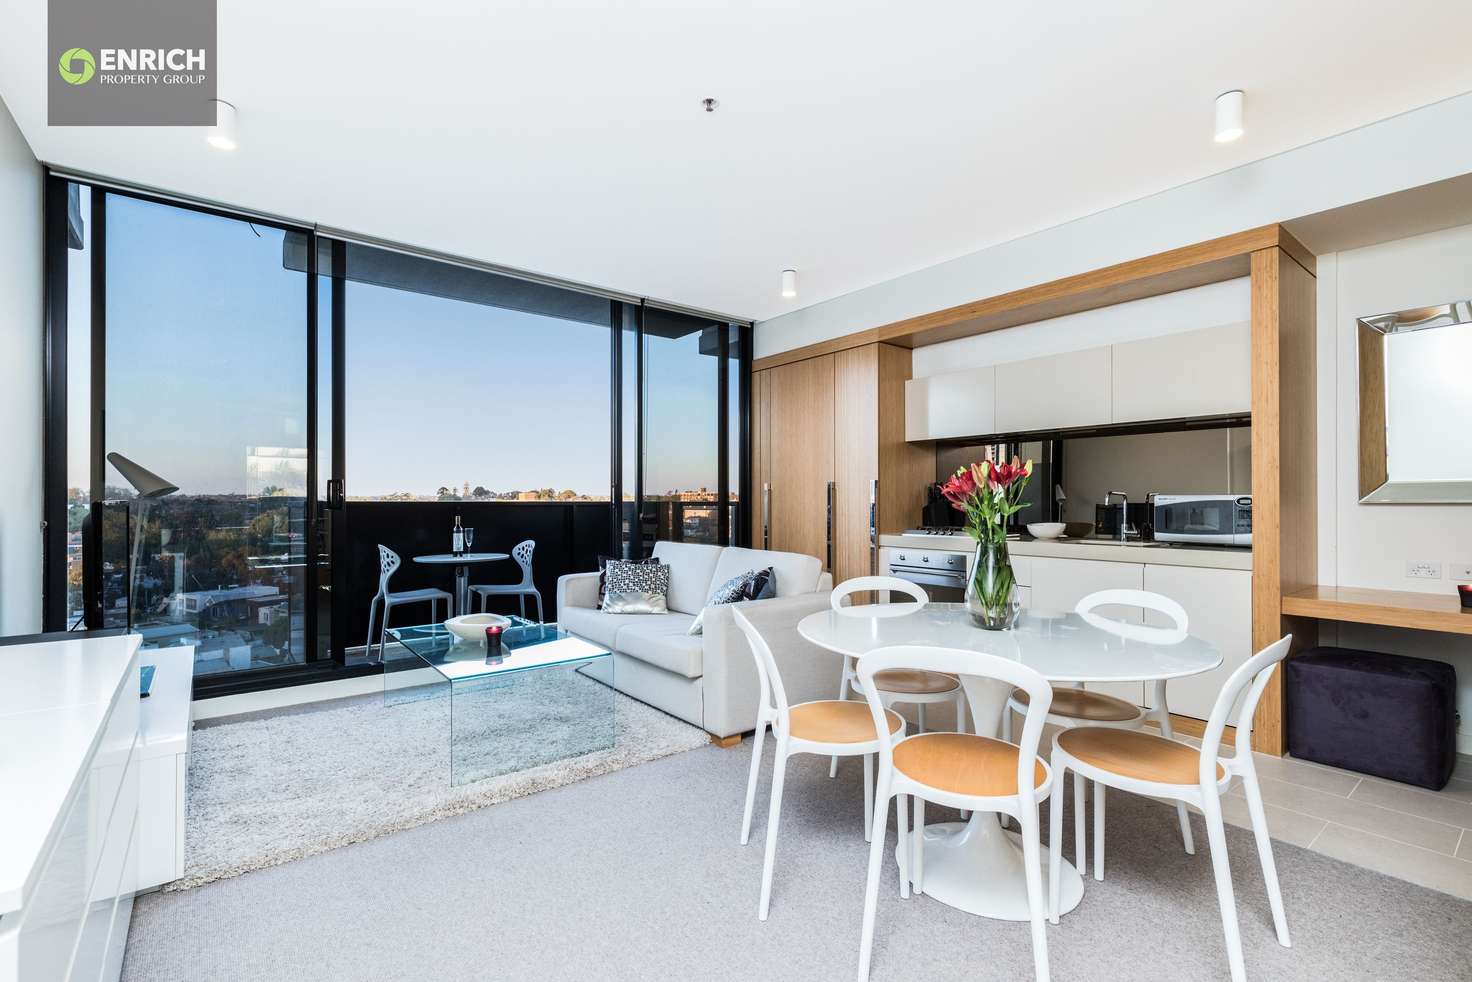 Main view of Homely apartment listing, 704/1 Clara St, South Yarra VIC 3141